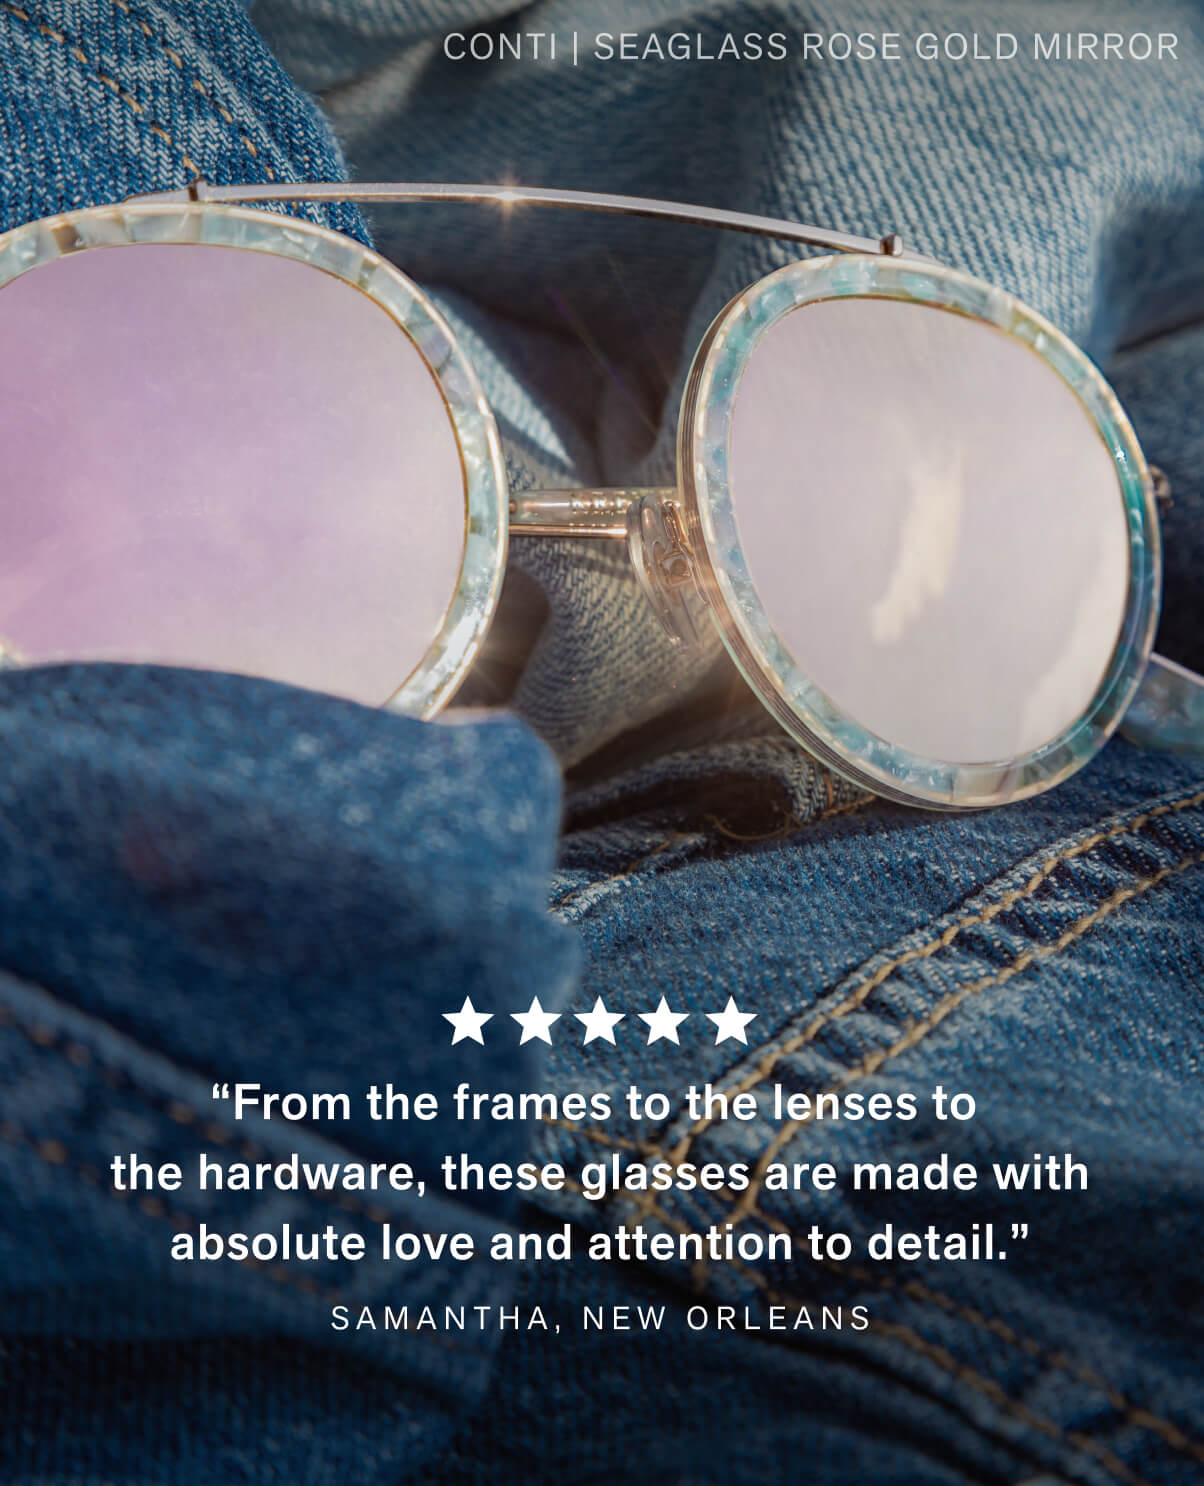 “From the frames to the lenses to the hardware, these glasses are made with absolute love and attention to detail.” Samantha, New Orleans